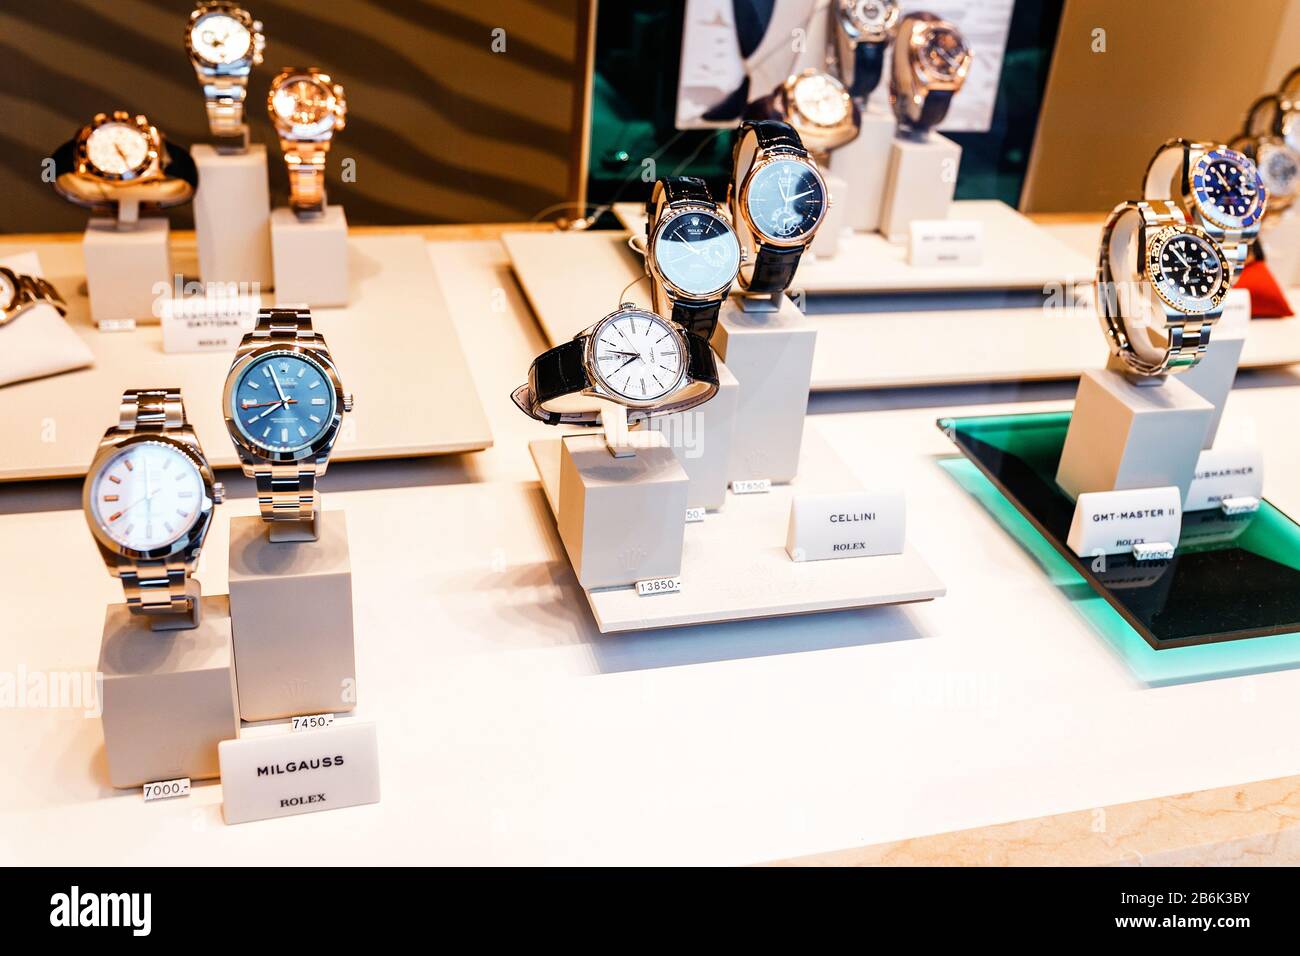 DRESDEN, GERMANY, MARCH 21, 2017: Luxury wrist watch from the company Rolex on the store counter with price tags Stock Photo